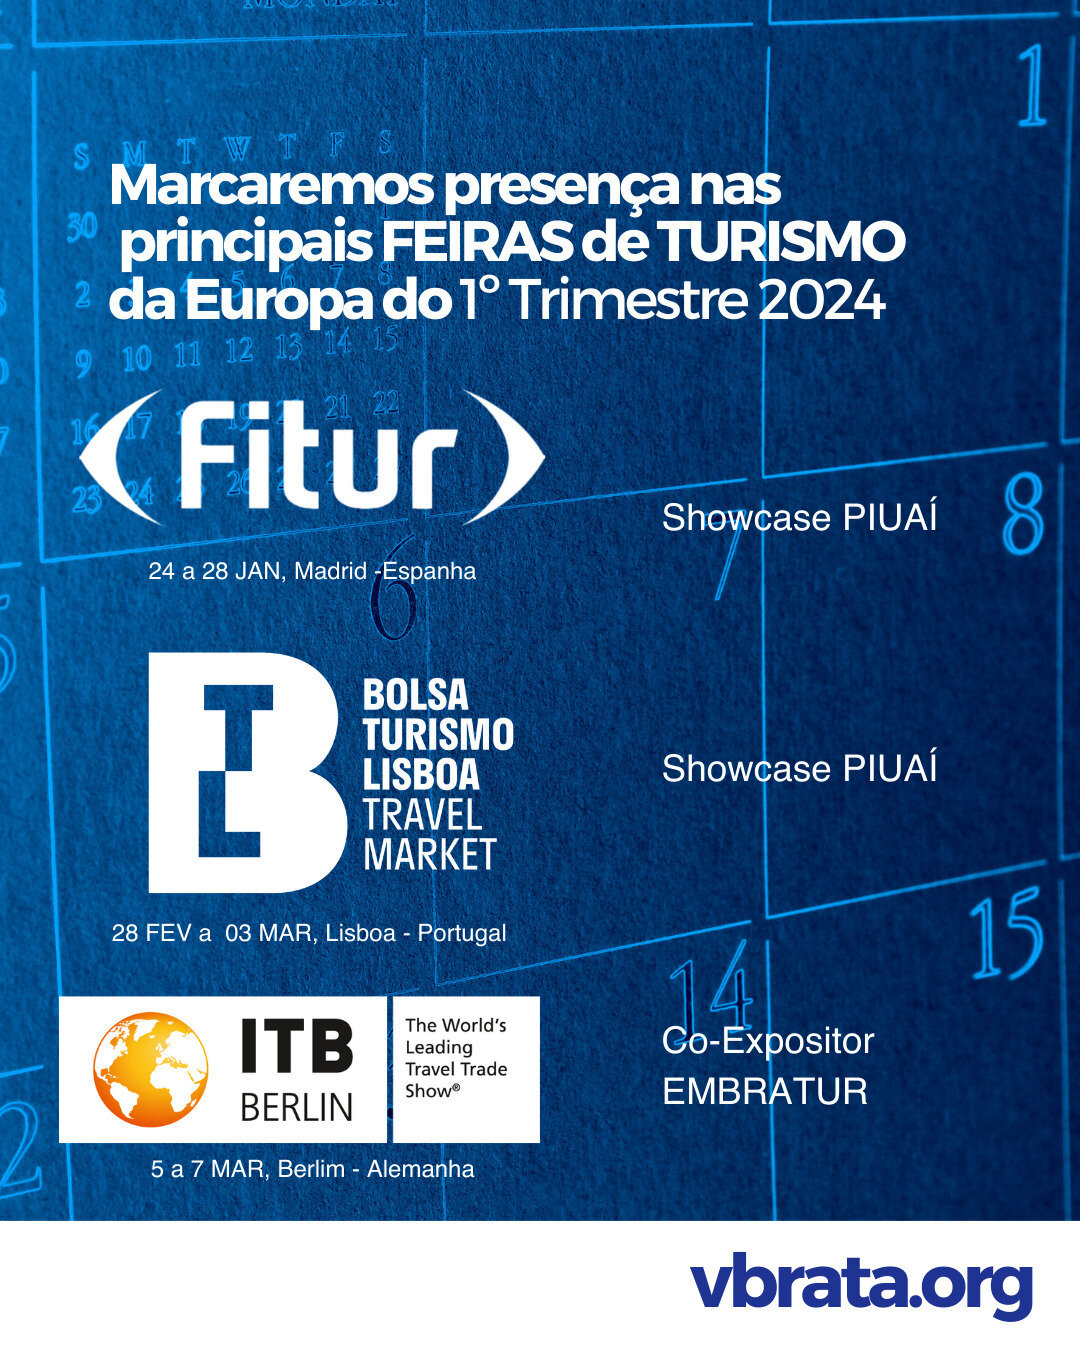 We're thrilled to announce that we're hitting the road to connect with the travel industry leaders at some of the world's most prestigious travel industry events.

The first stop is FITUR Madrid, then BLT Lisbon, where we'll be showcasing the vibrant